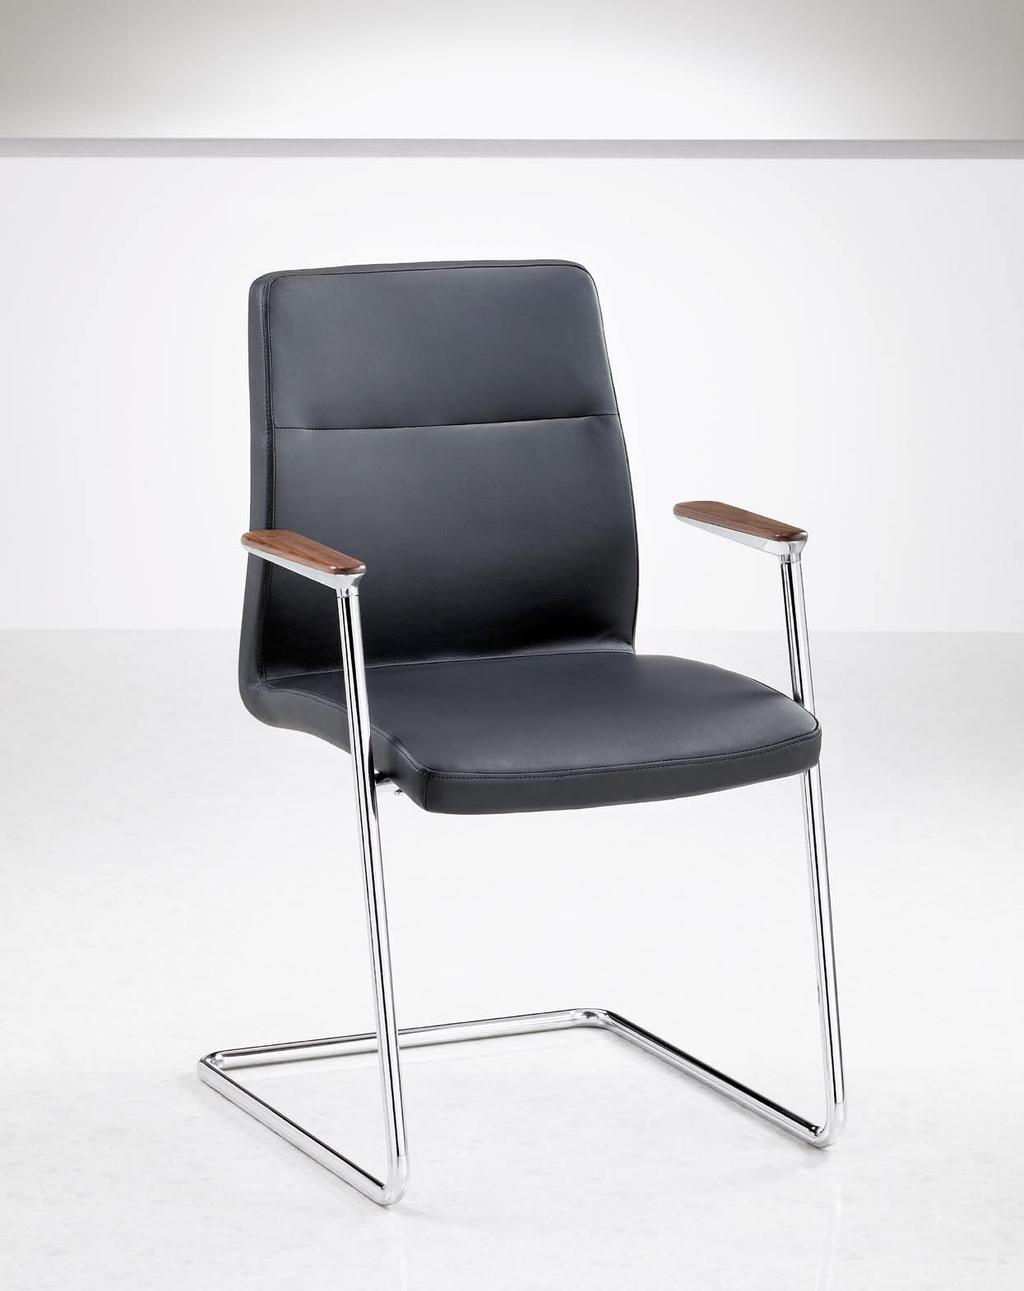 Meeting and Conference Chairs Fulcrum F3 Cantilever Frame The F3 shares the same comfortable